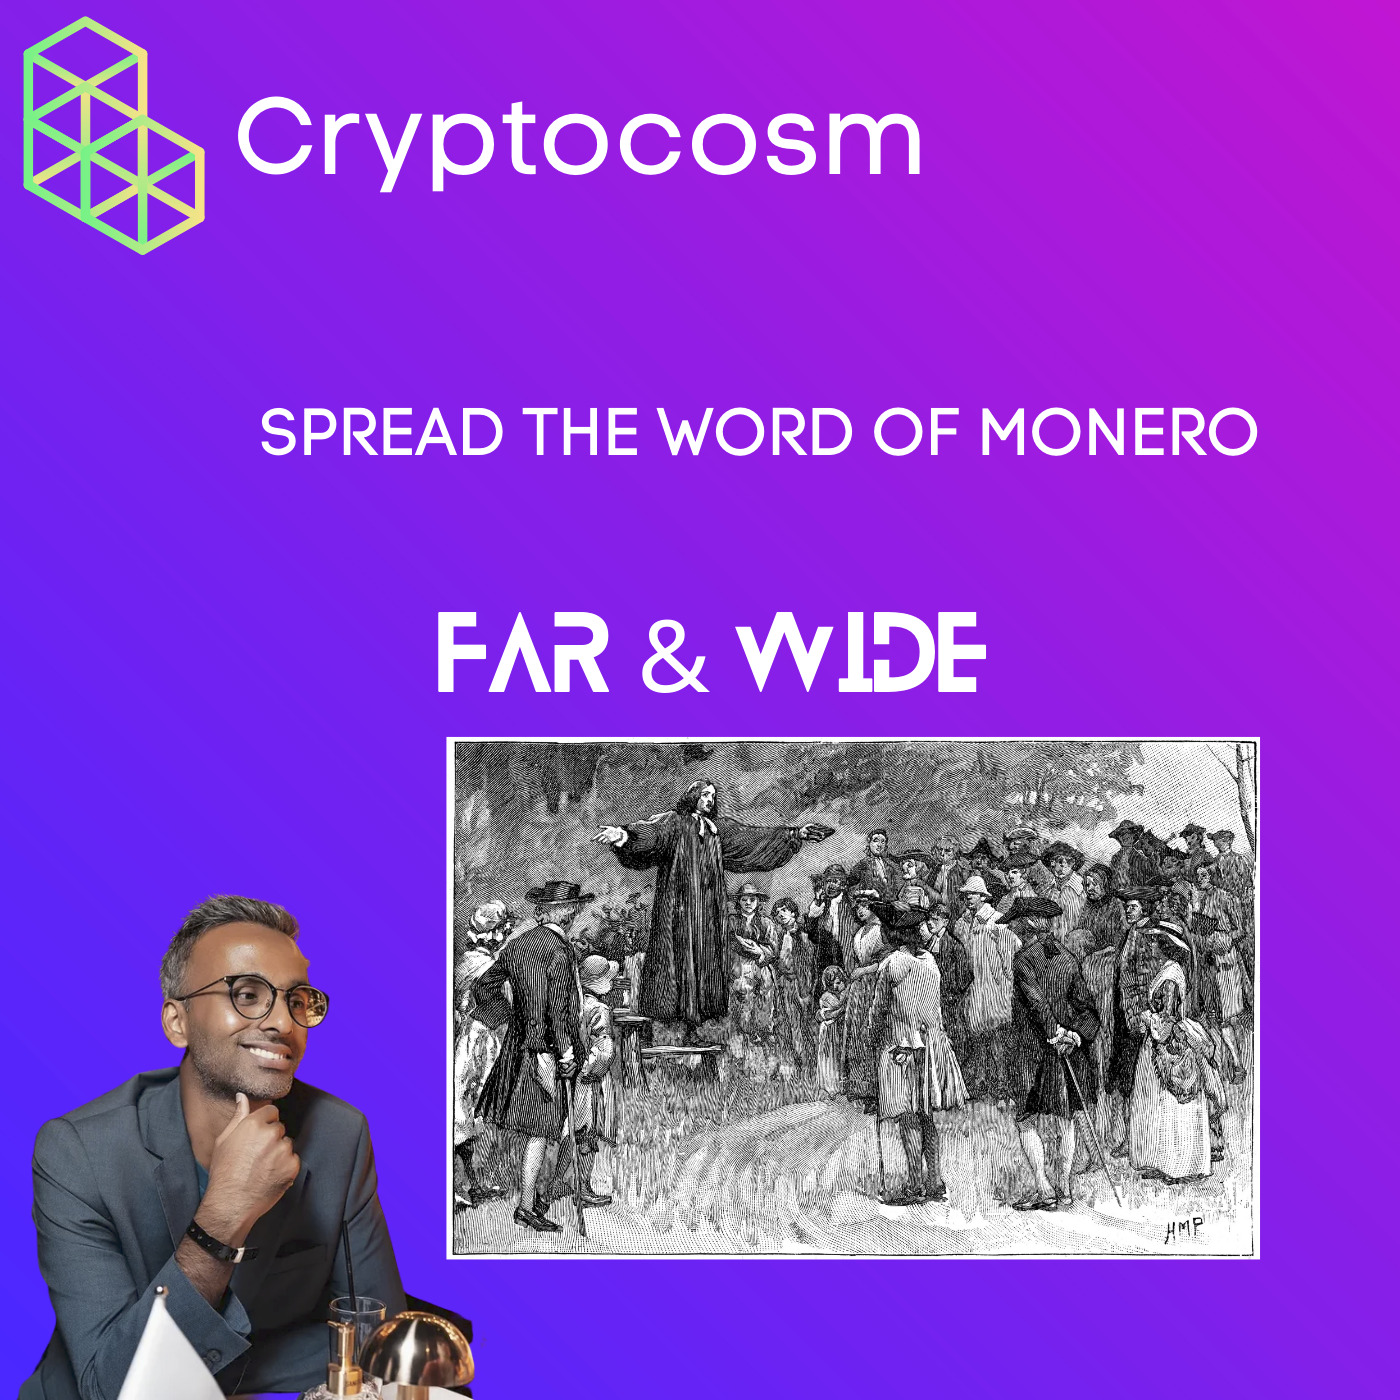 SPREAD THE WORD OF MONERO FAR & WIDE TO THE PEOPLE OF THE WORLD